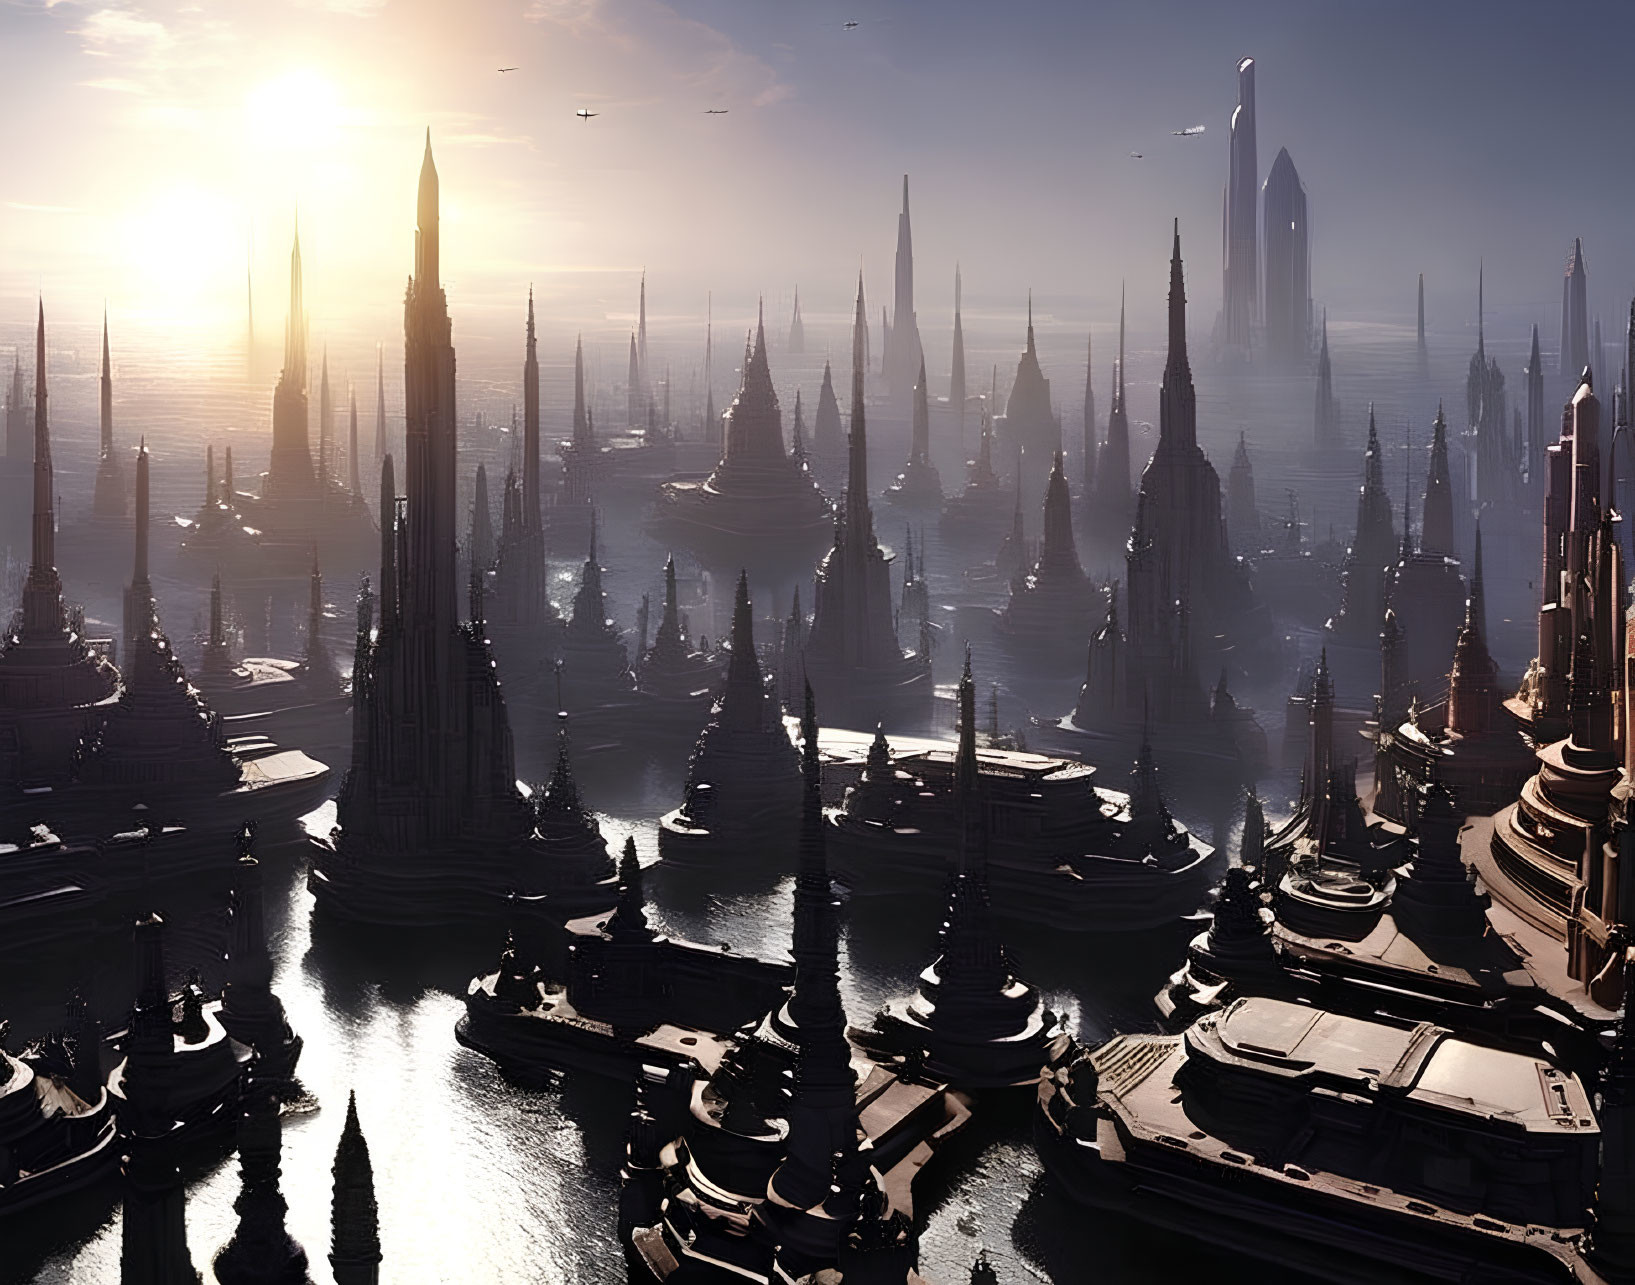 Futuristic cityscape with towering spires at sunrise